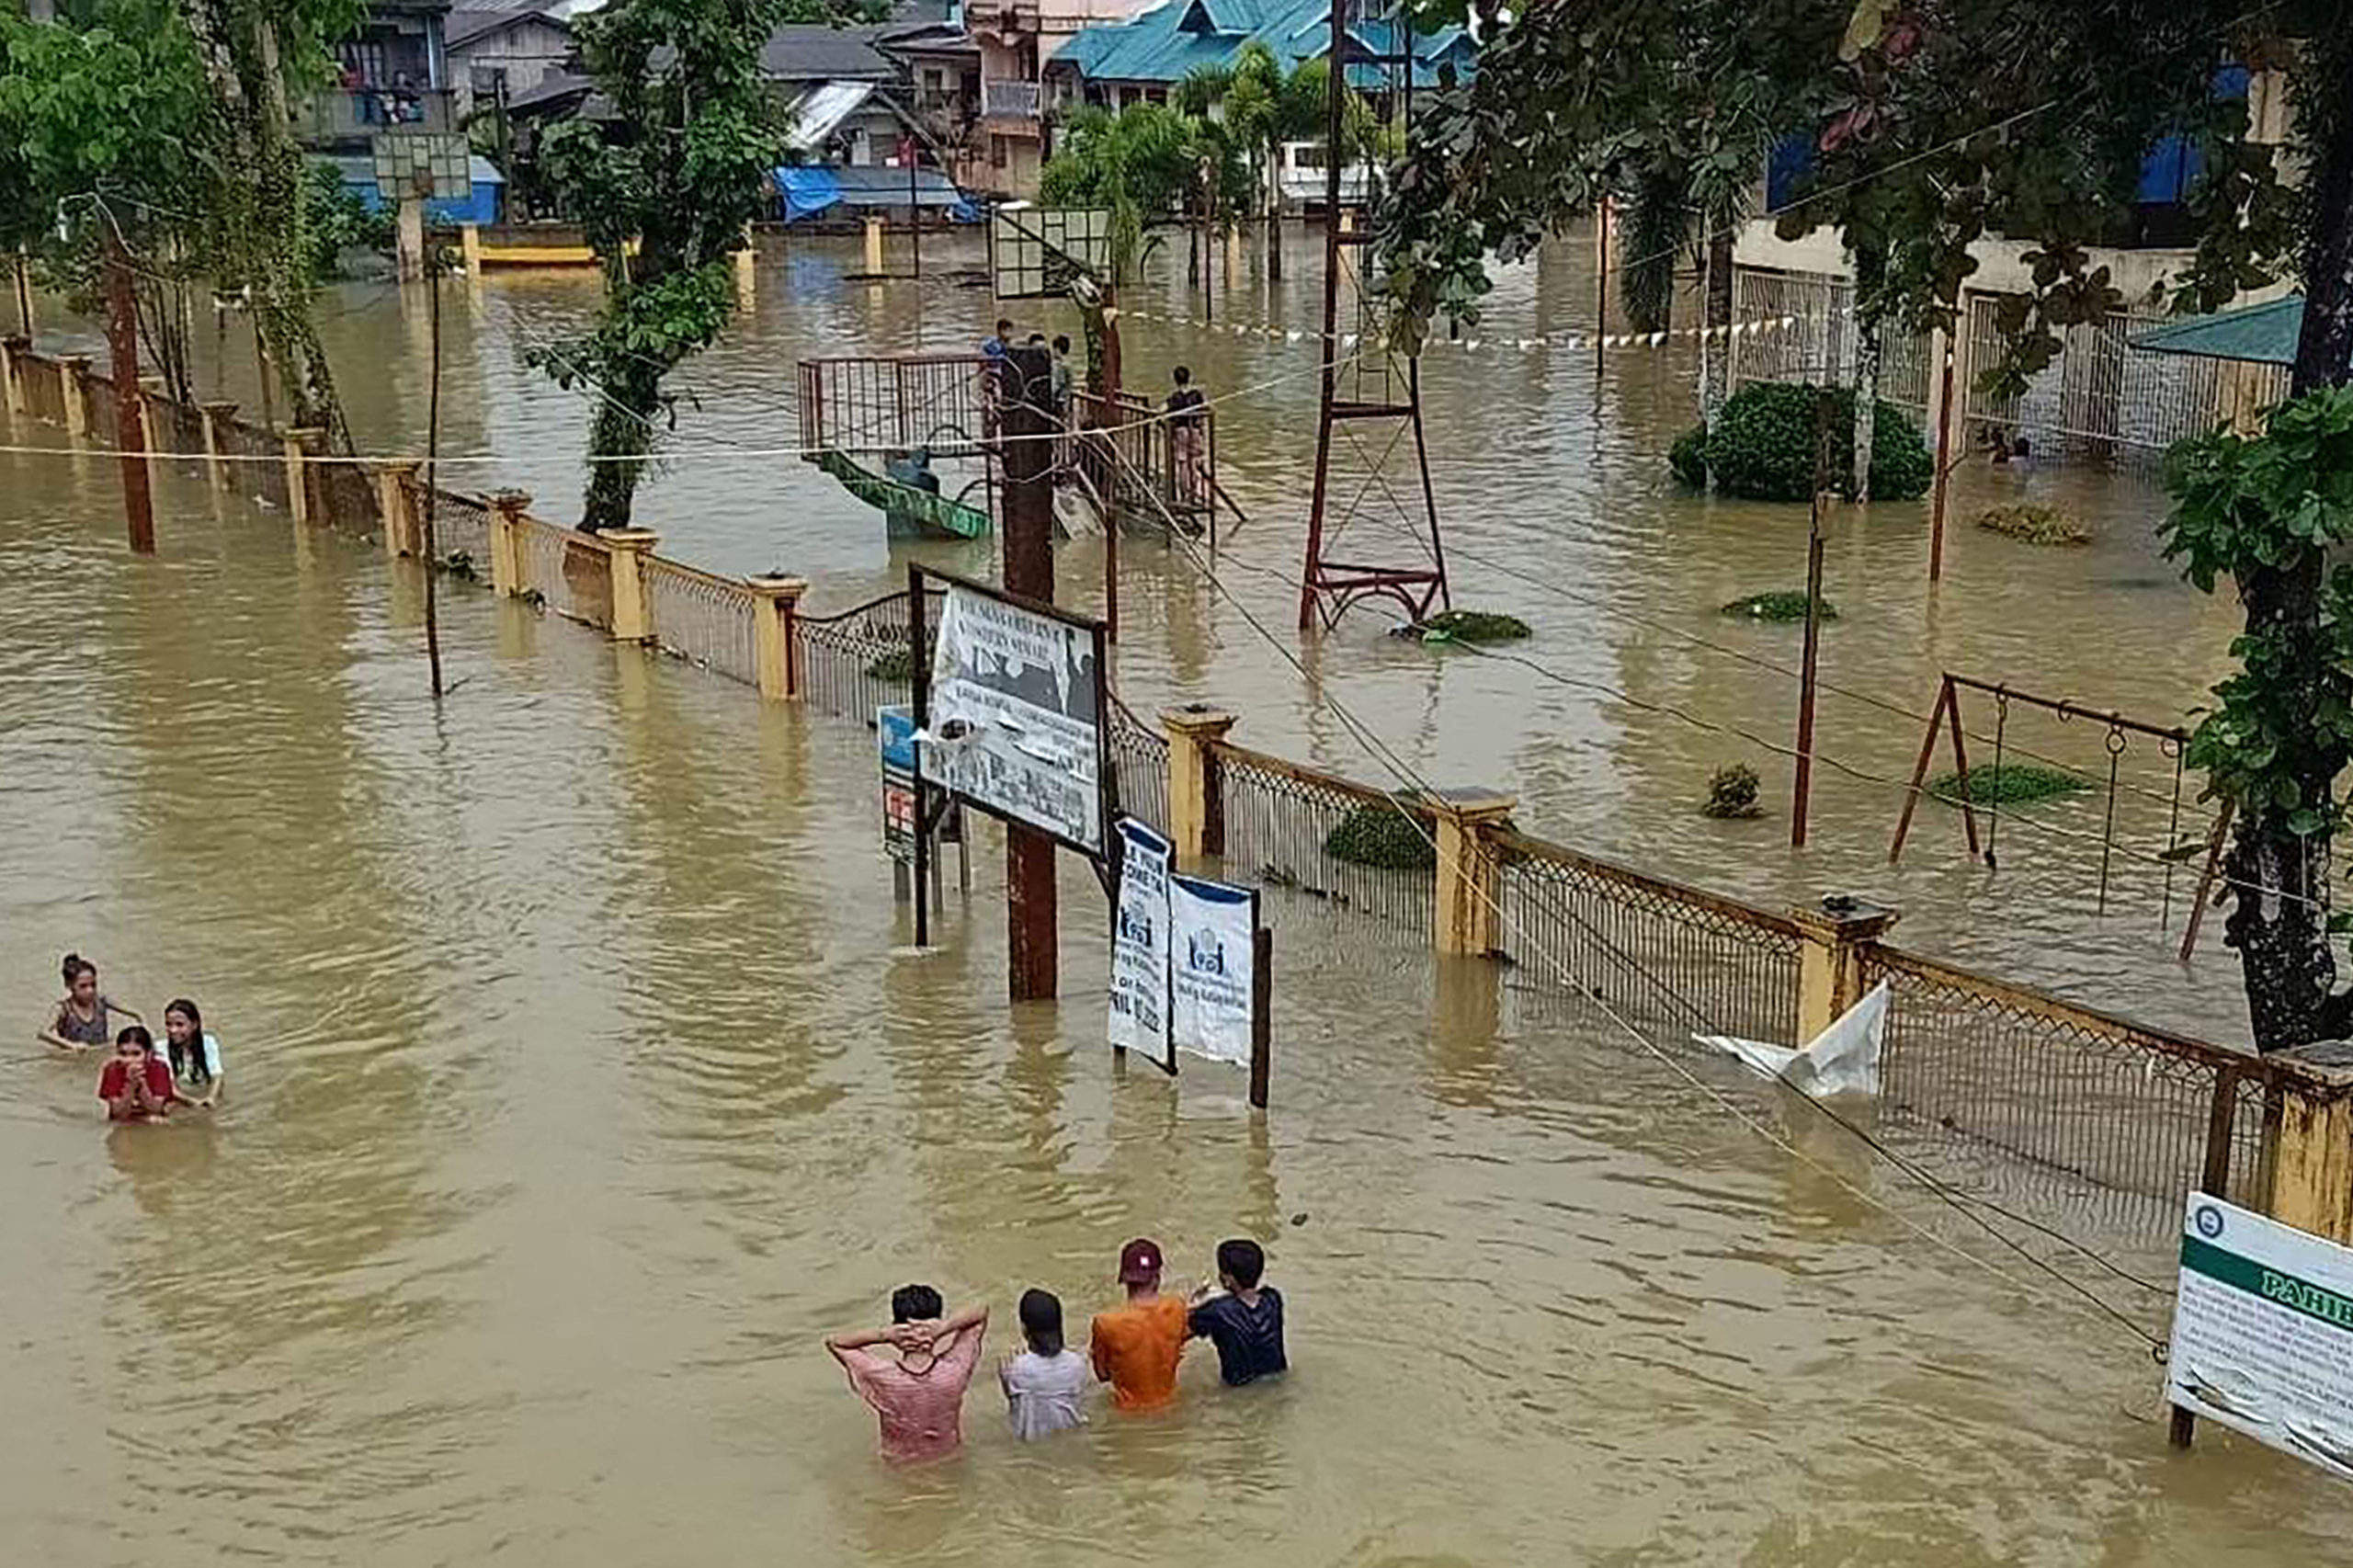 This handout photo taken on January 11, 2023 and received from Jipapad Mayor Benjamin Ver shows residents wading through a flooded road in Jipapad town, Eastern Samar province. At least 11 people have died in storms across the Philippines in the past week, with more heavy rain expected in already sodden regions of the disaster-prone country, authorities said on January 10.